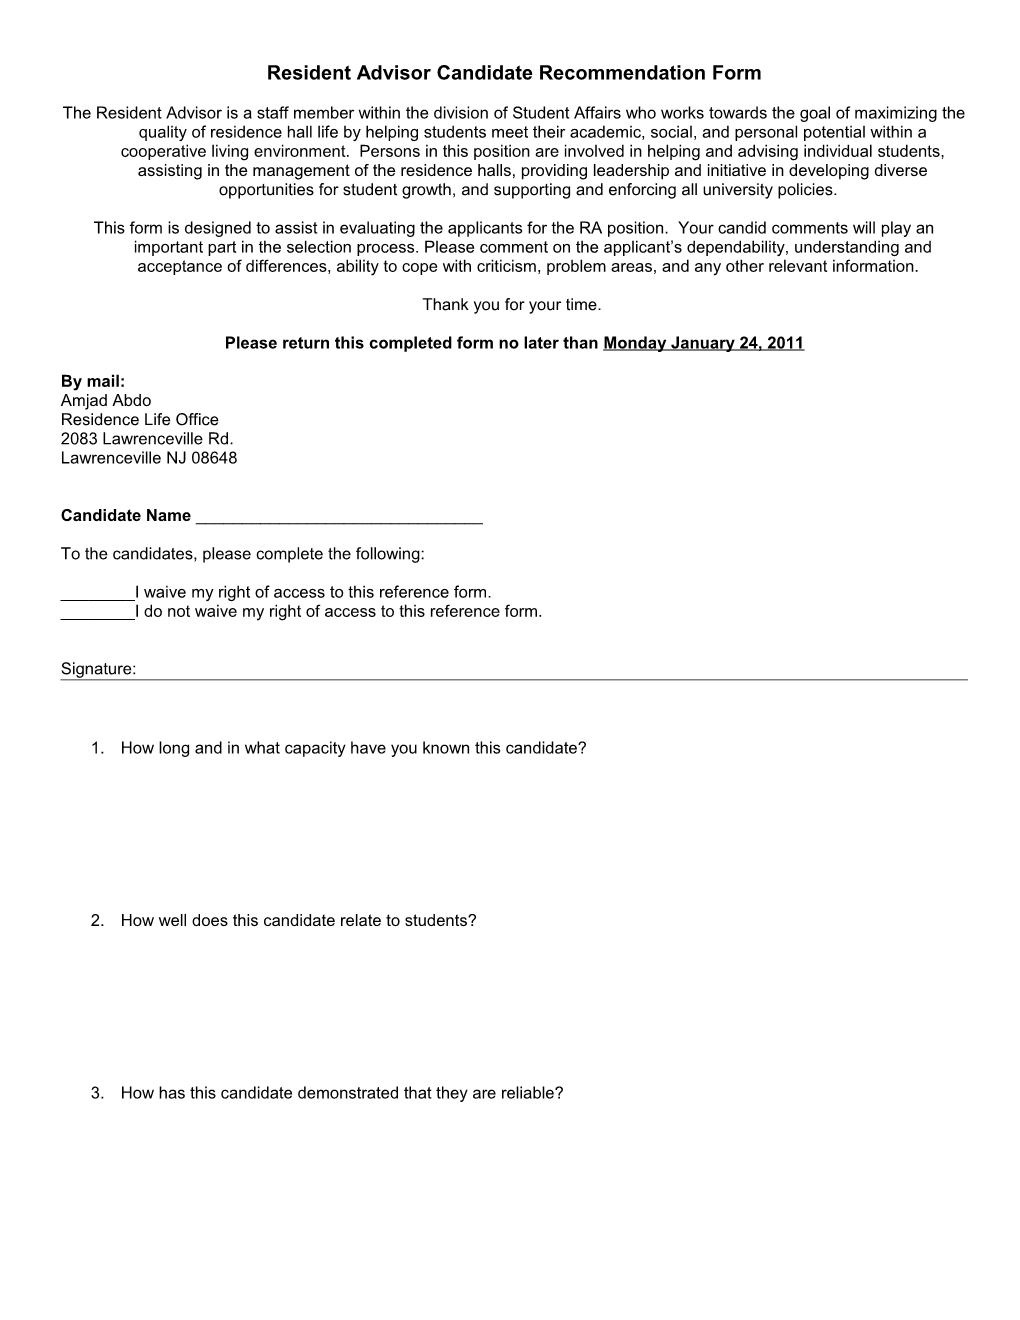 Resident Advisor Candidate Recommendation Form